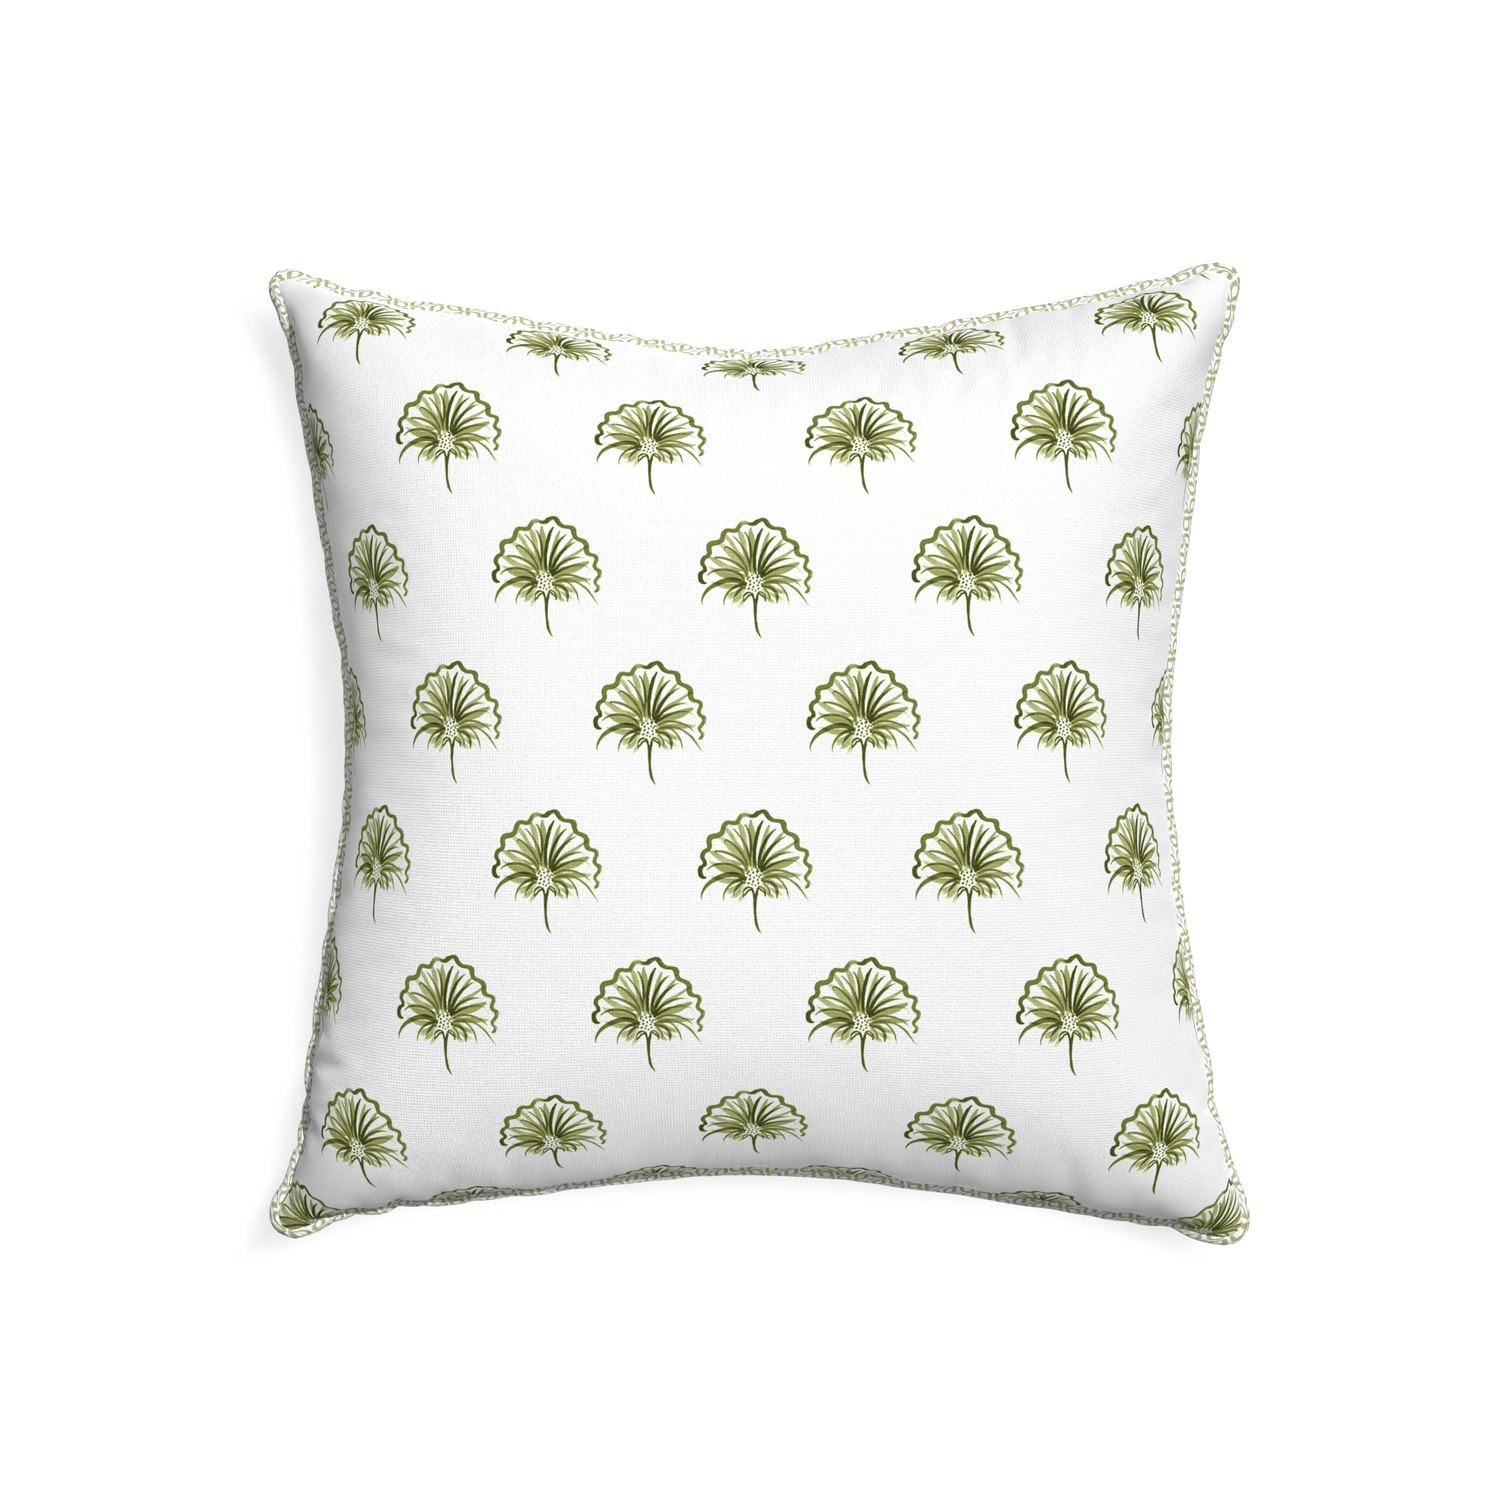 22-square penelope moss custom green floralpillow with l piping on white background